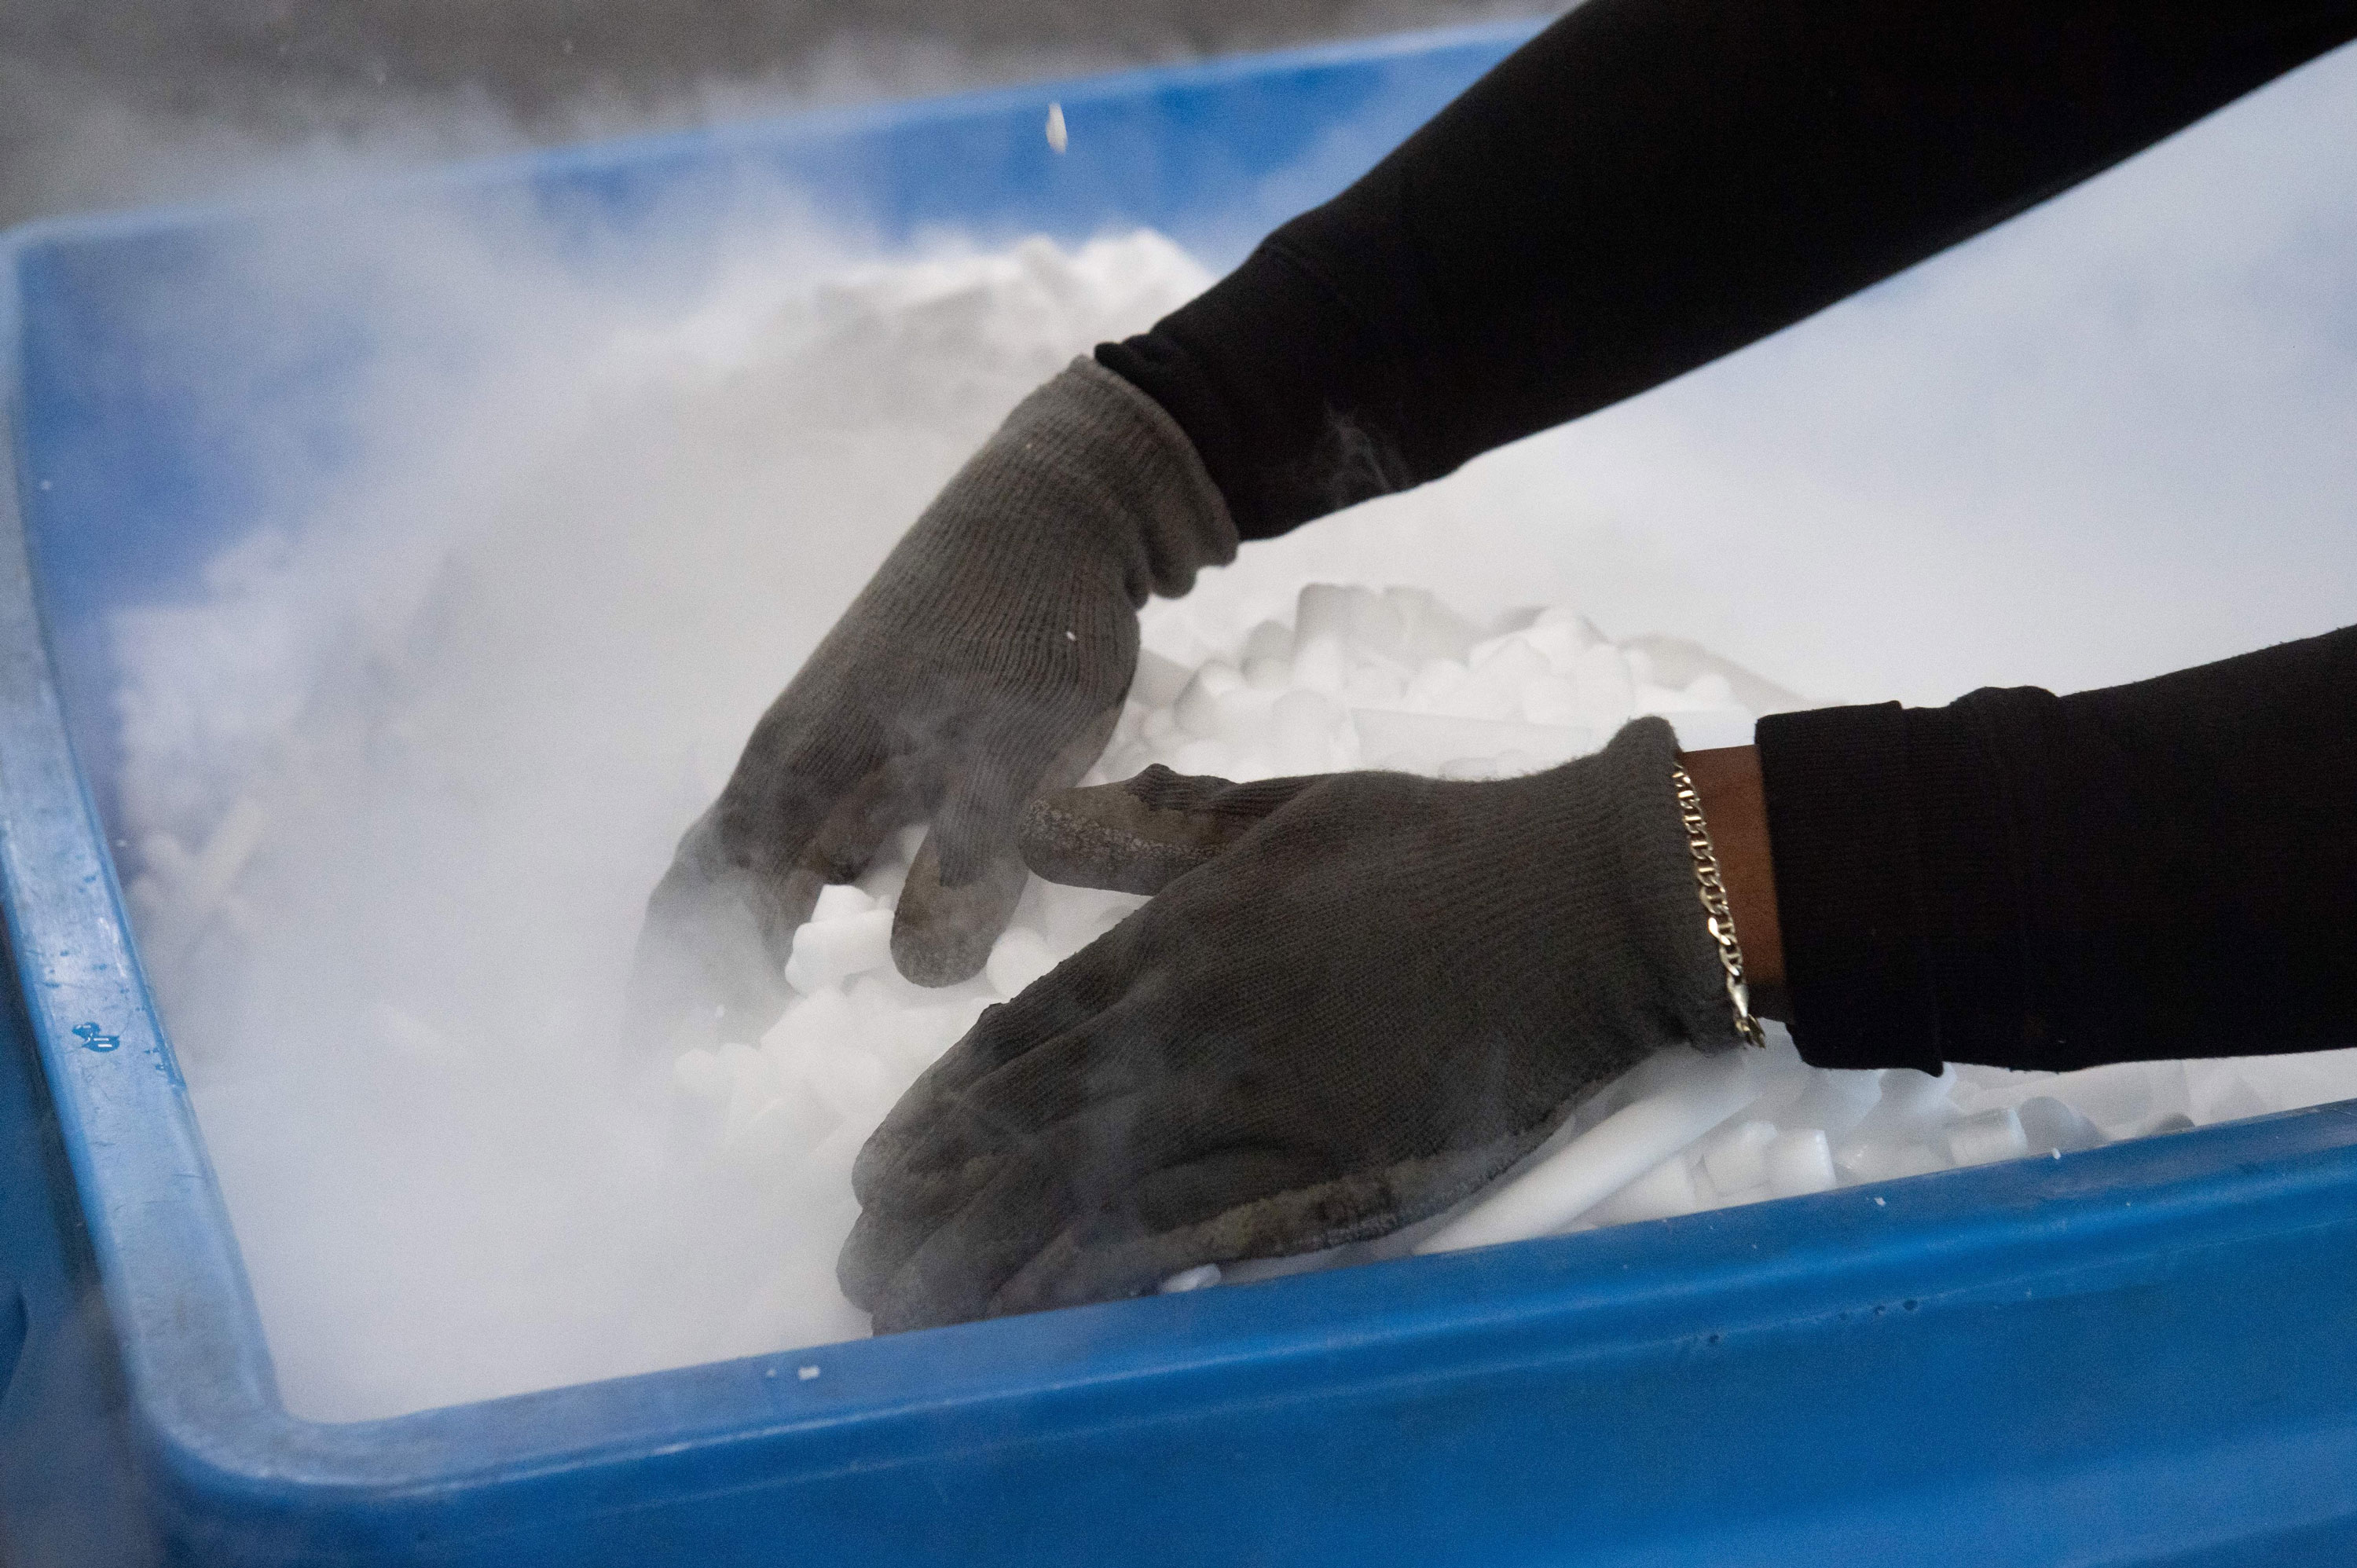 An employee makes dry ice pellets at Capitol Carbonic, a dry ice factory contacted by Pfizer for its Covid-19 vaccine, in Baltimore, Maryland on Nov. 20.